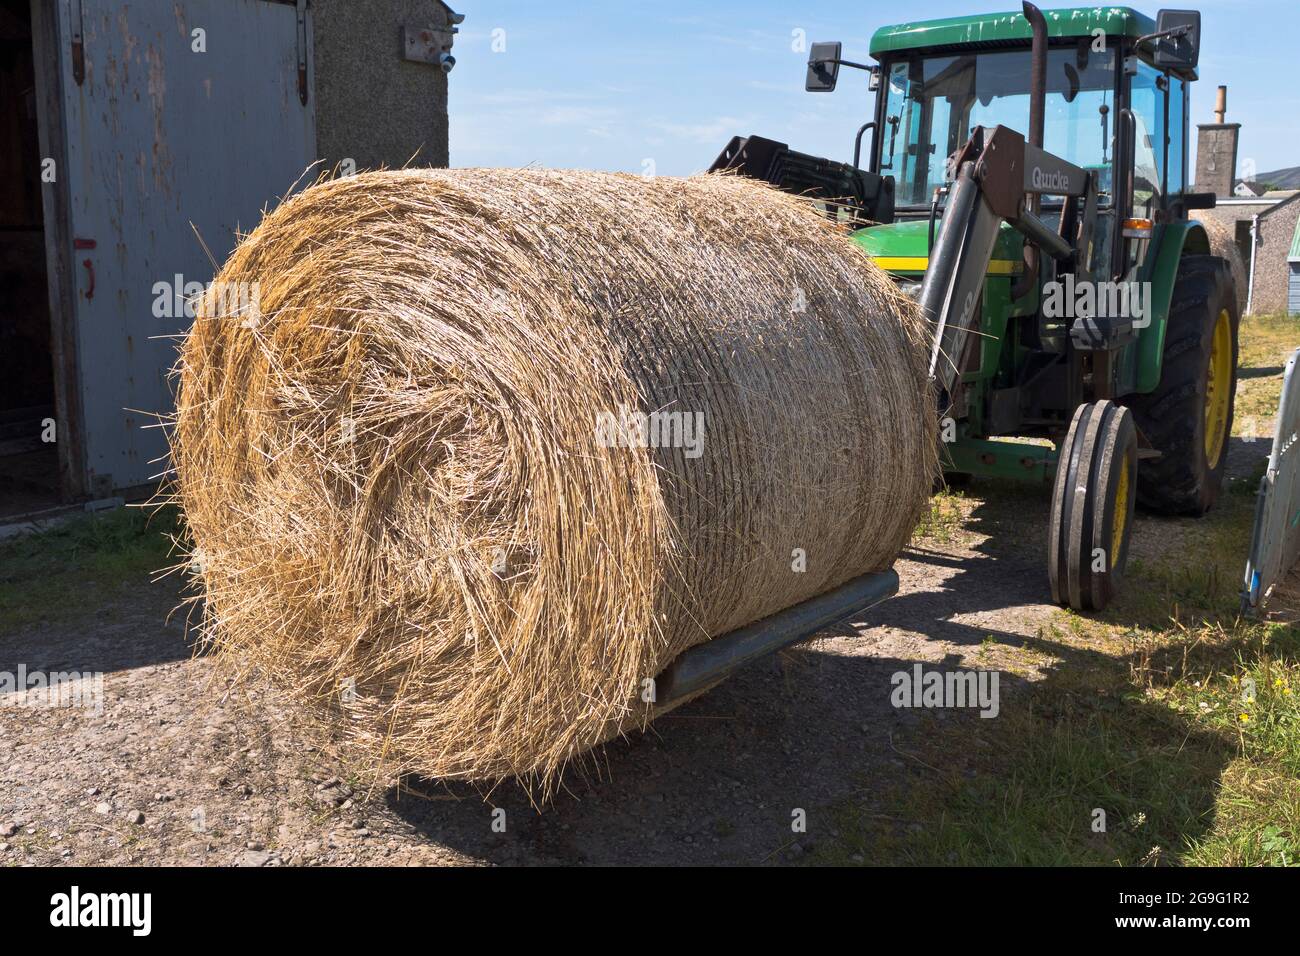 dh Bales FARMING UK Round straw bale on tractor lifter front loader forklift hay farm machinery fork attachment Stock Photo